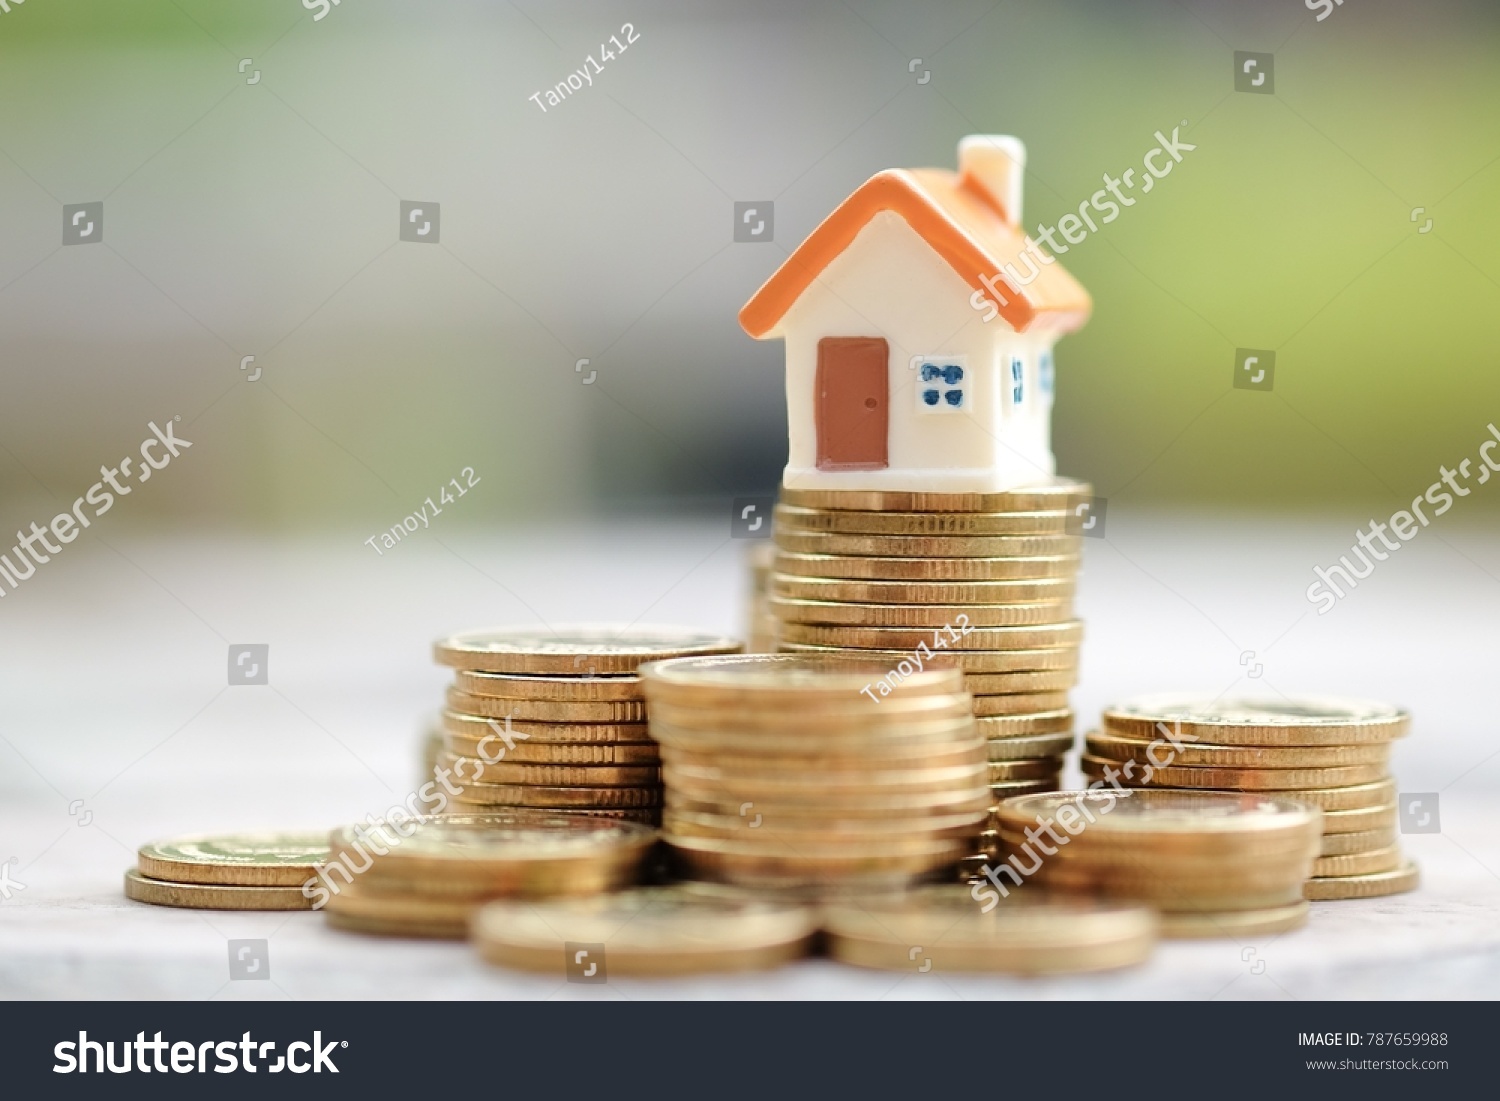 Mini house on stack of coins. Concept of Investment property. #787659988